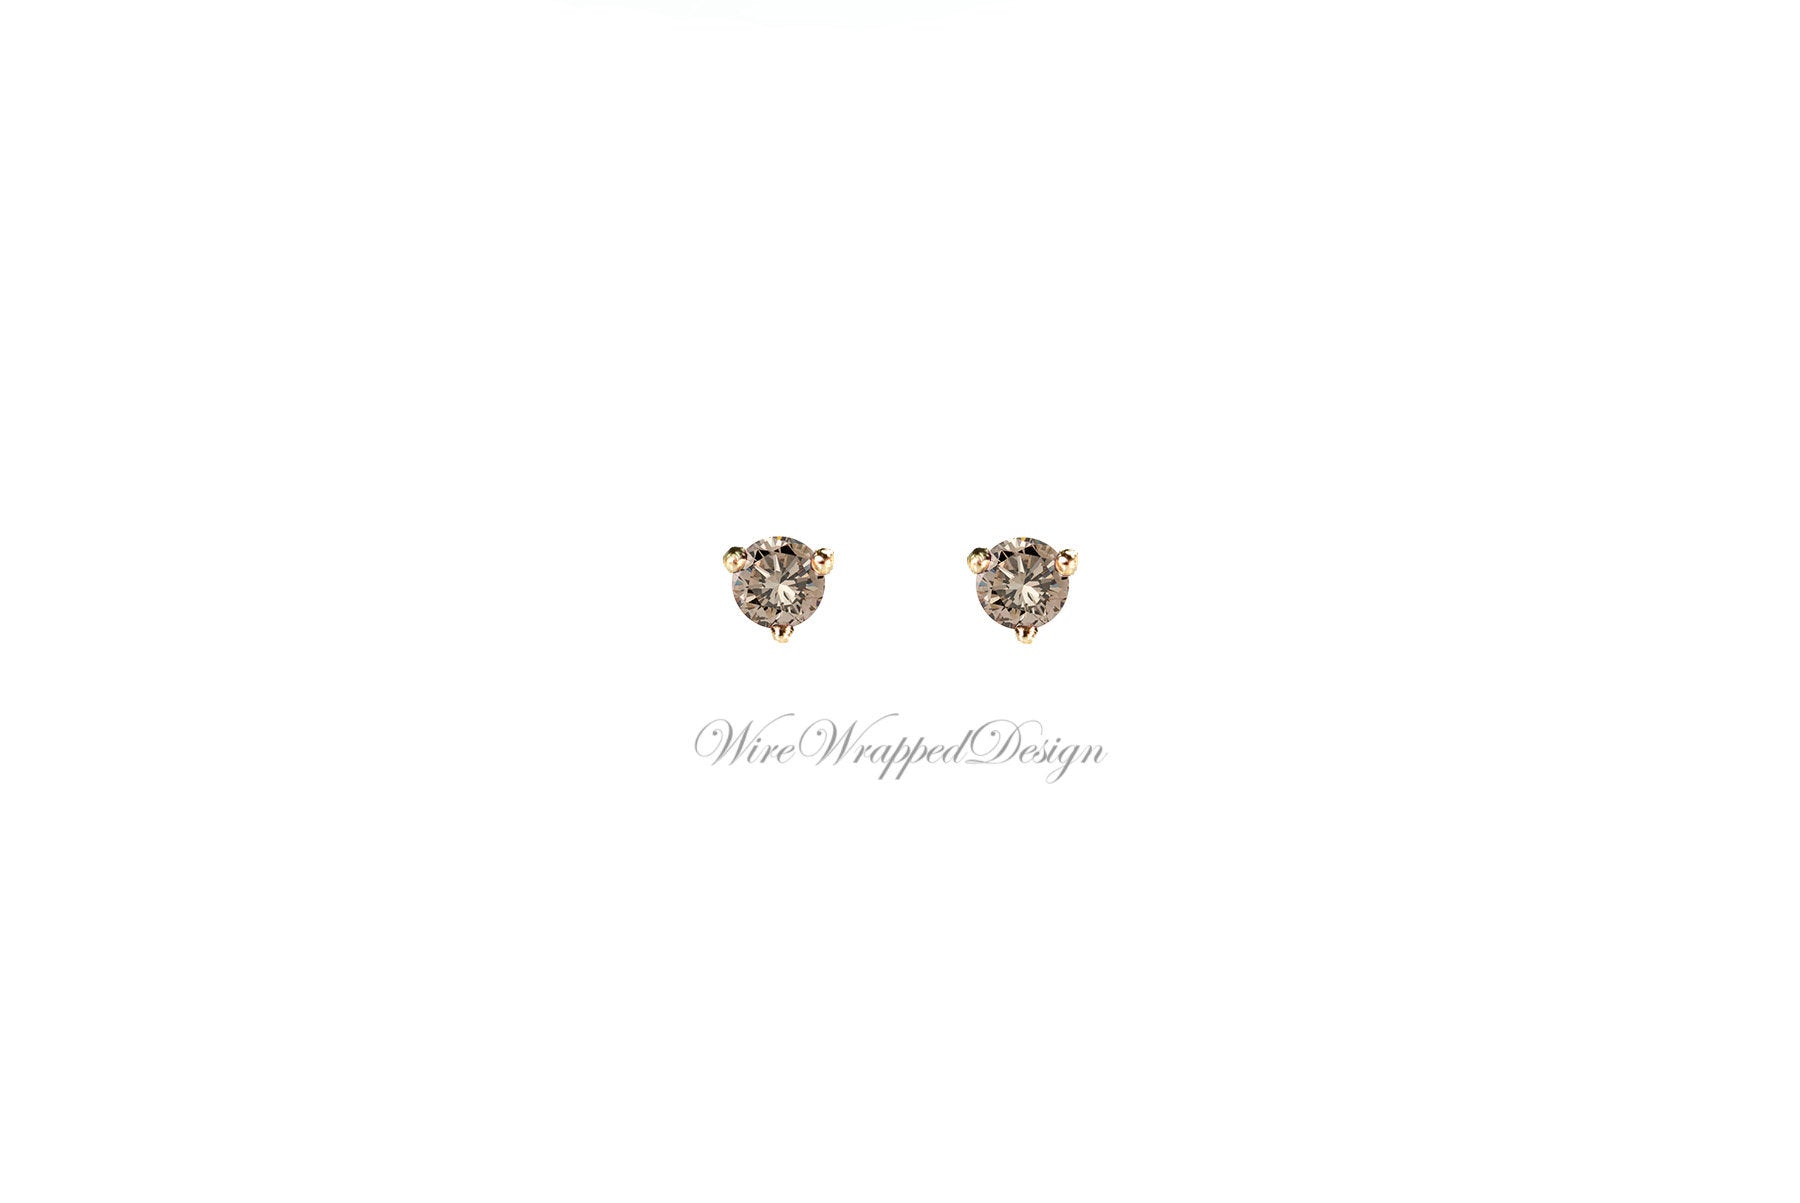 PAIR Genuine CHAMPAGNE DIAMOND Earrings Studs 2.5mm 0.12tcw Martini 14k Solid Gold (Yellow, Rose, White) Platinum Silver Cartilage Tragus